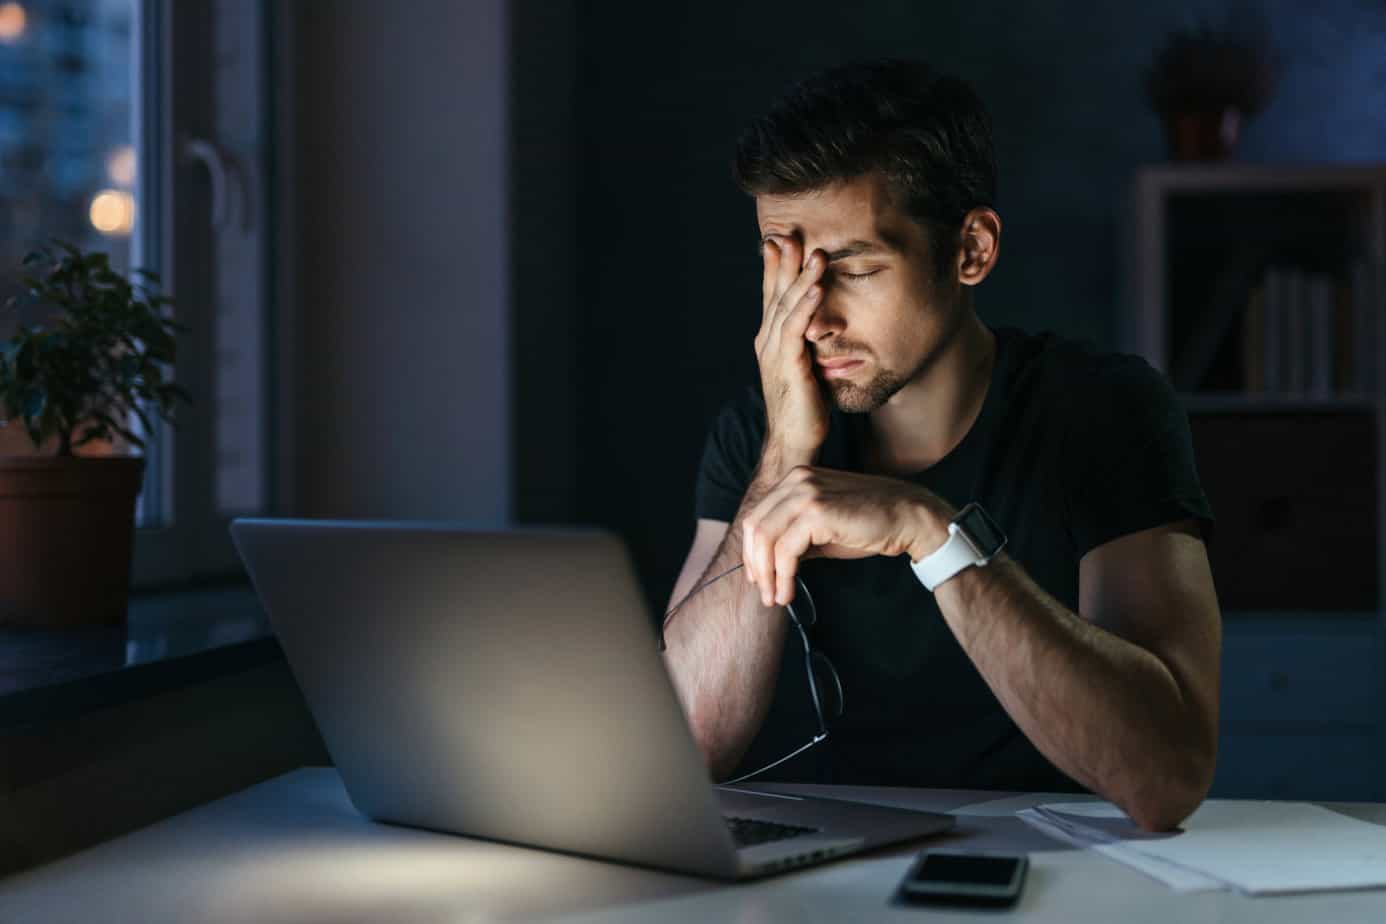 tired and stressed man sits in front of computer in dimly lit room